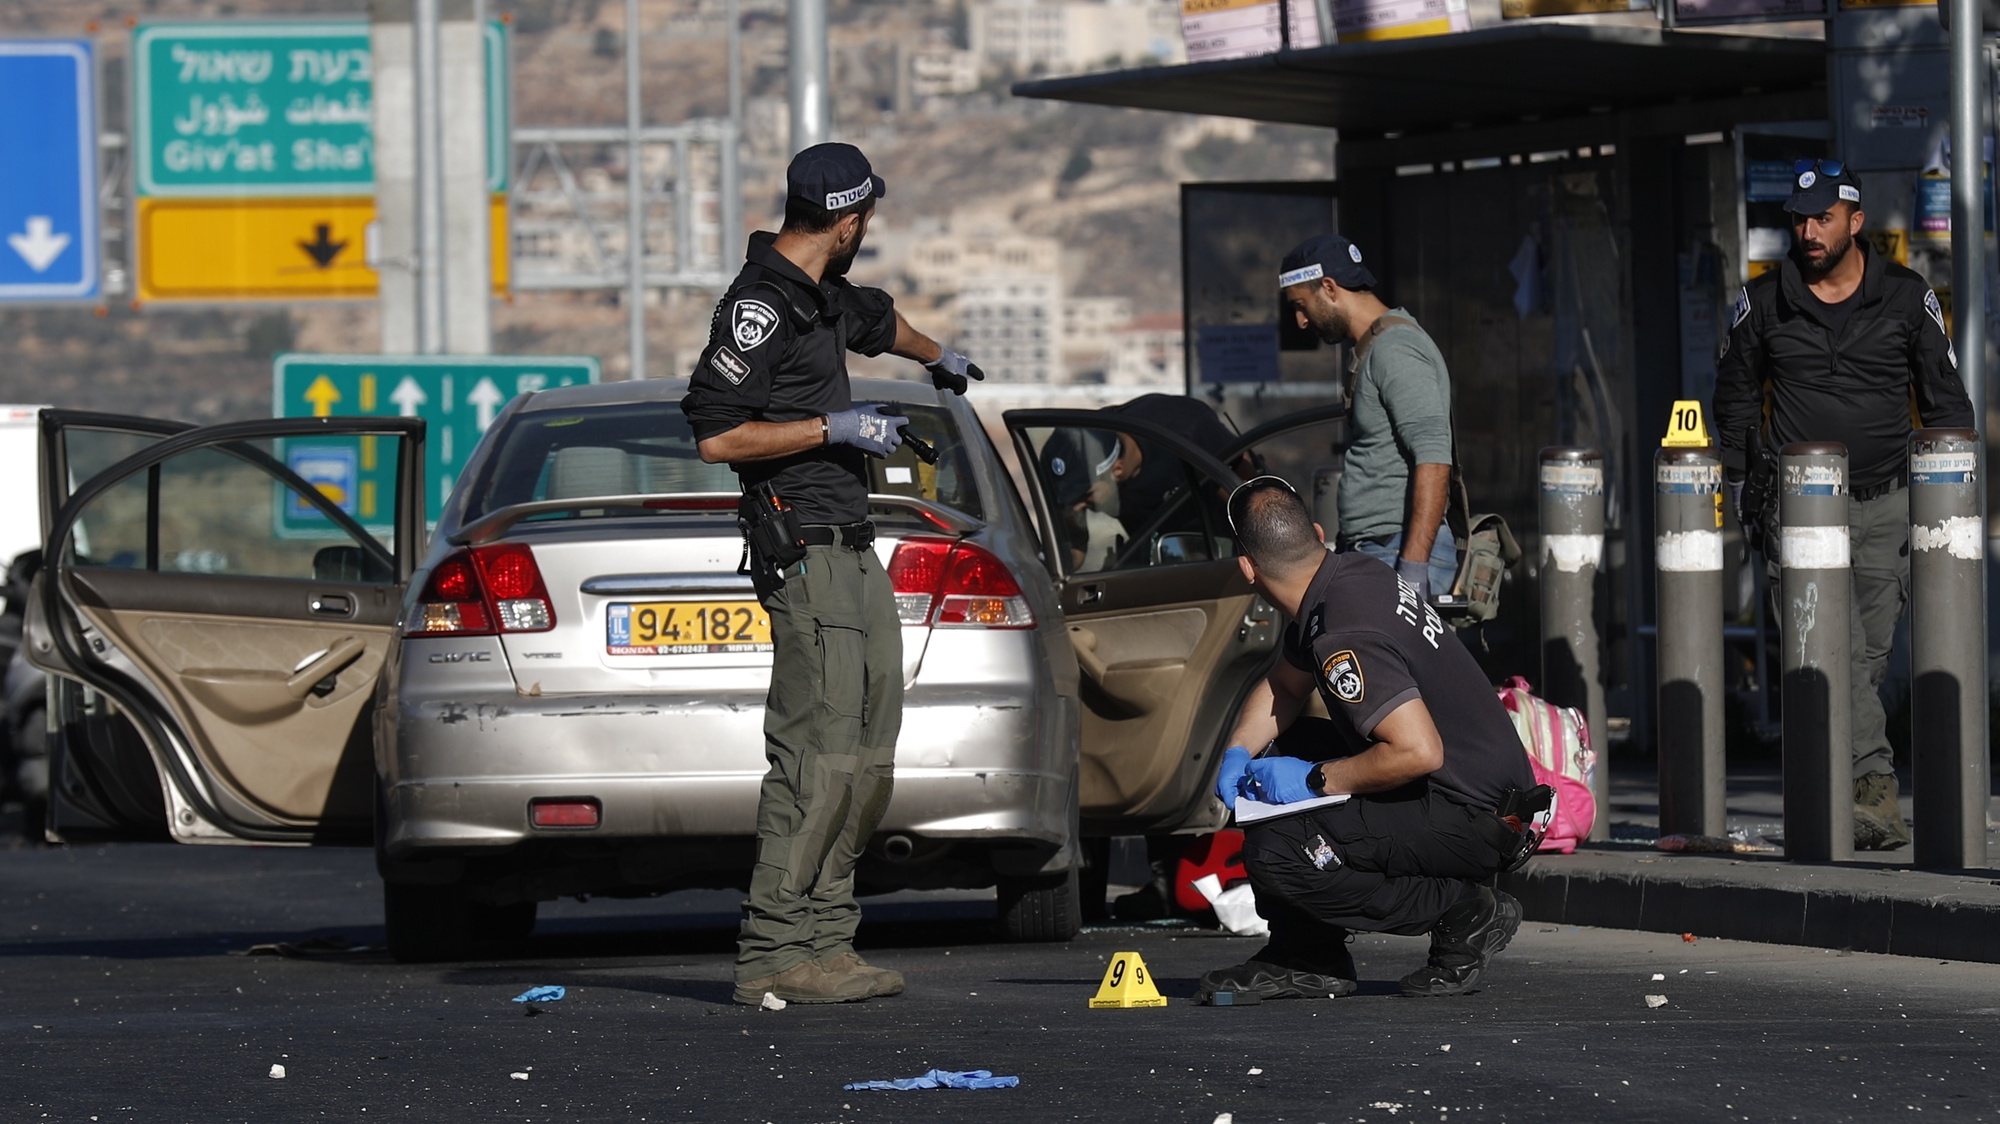 epa10321716 Israeli security forces stand at site of explosion at a bus stop near entrance to Jerusalem, Israel, 23 November 2022. According to Israeli police, at least 12 people were injured in two explosions at two bus stops near entrances to Jerusalem.  EPA/ATEF SAFADI